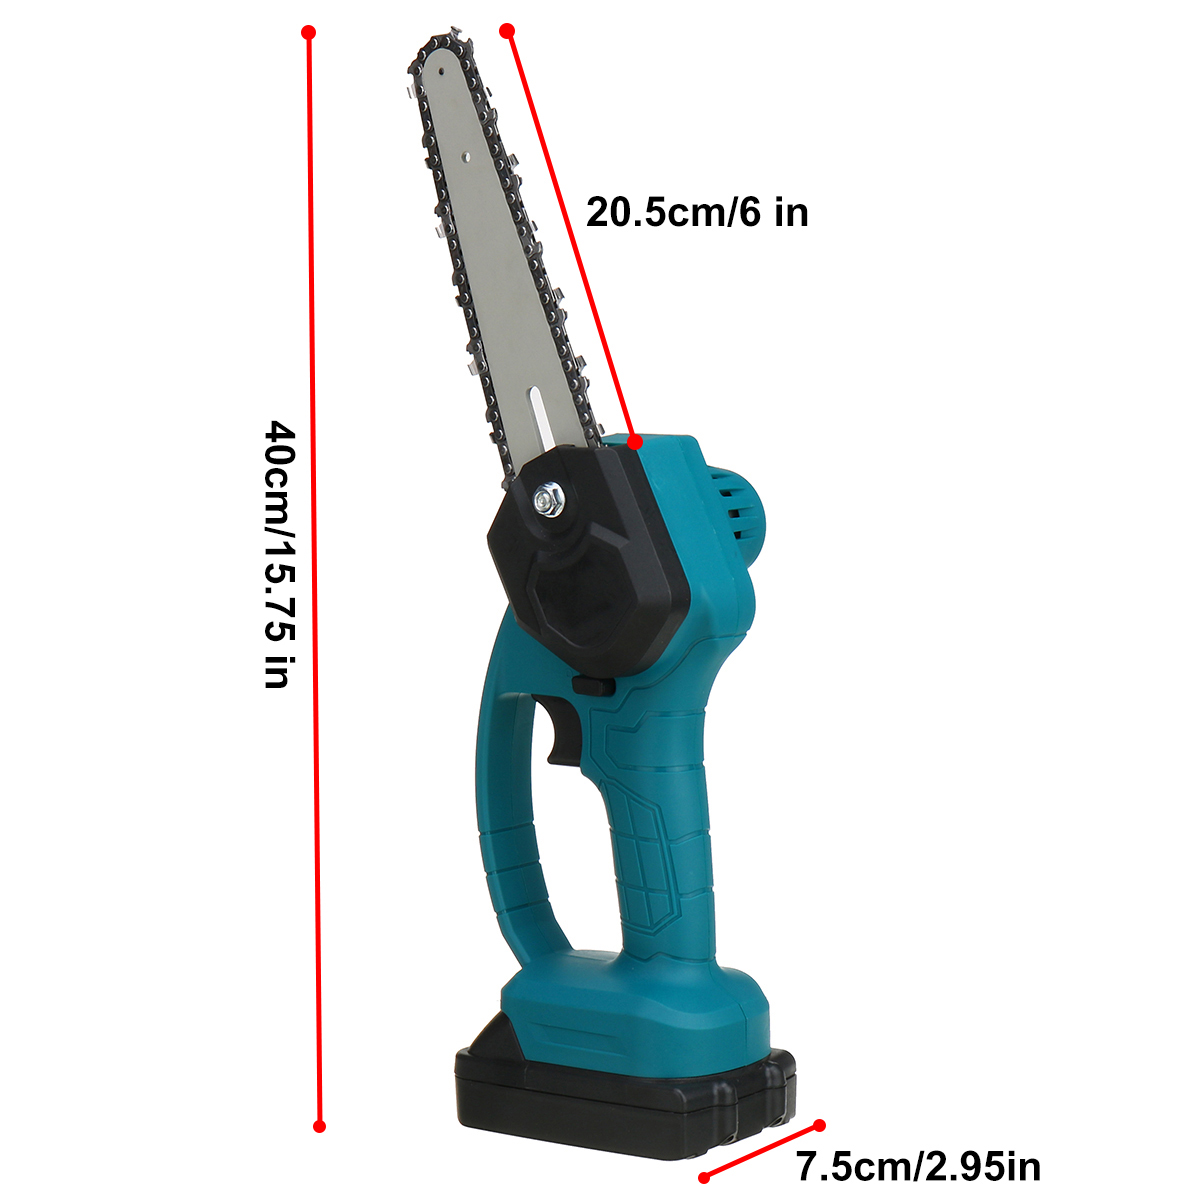 6inch-600W-Electric-Chain-Saw-Rechargeable-Stepless-Speed-Saws-Wood-Cutter-Woodworking-Tool-W-2pcs-B-1827208-9